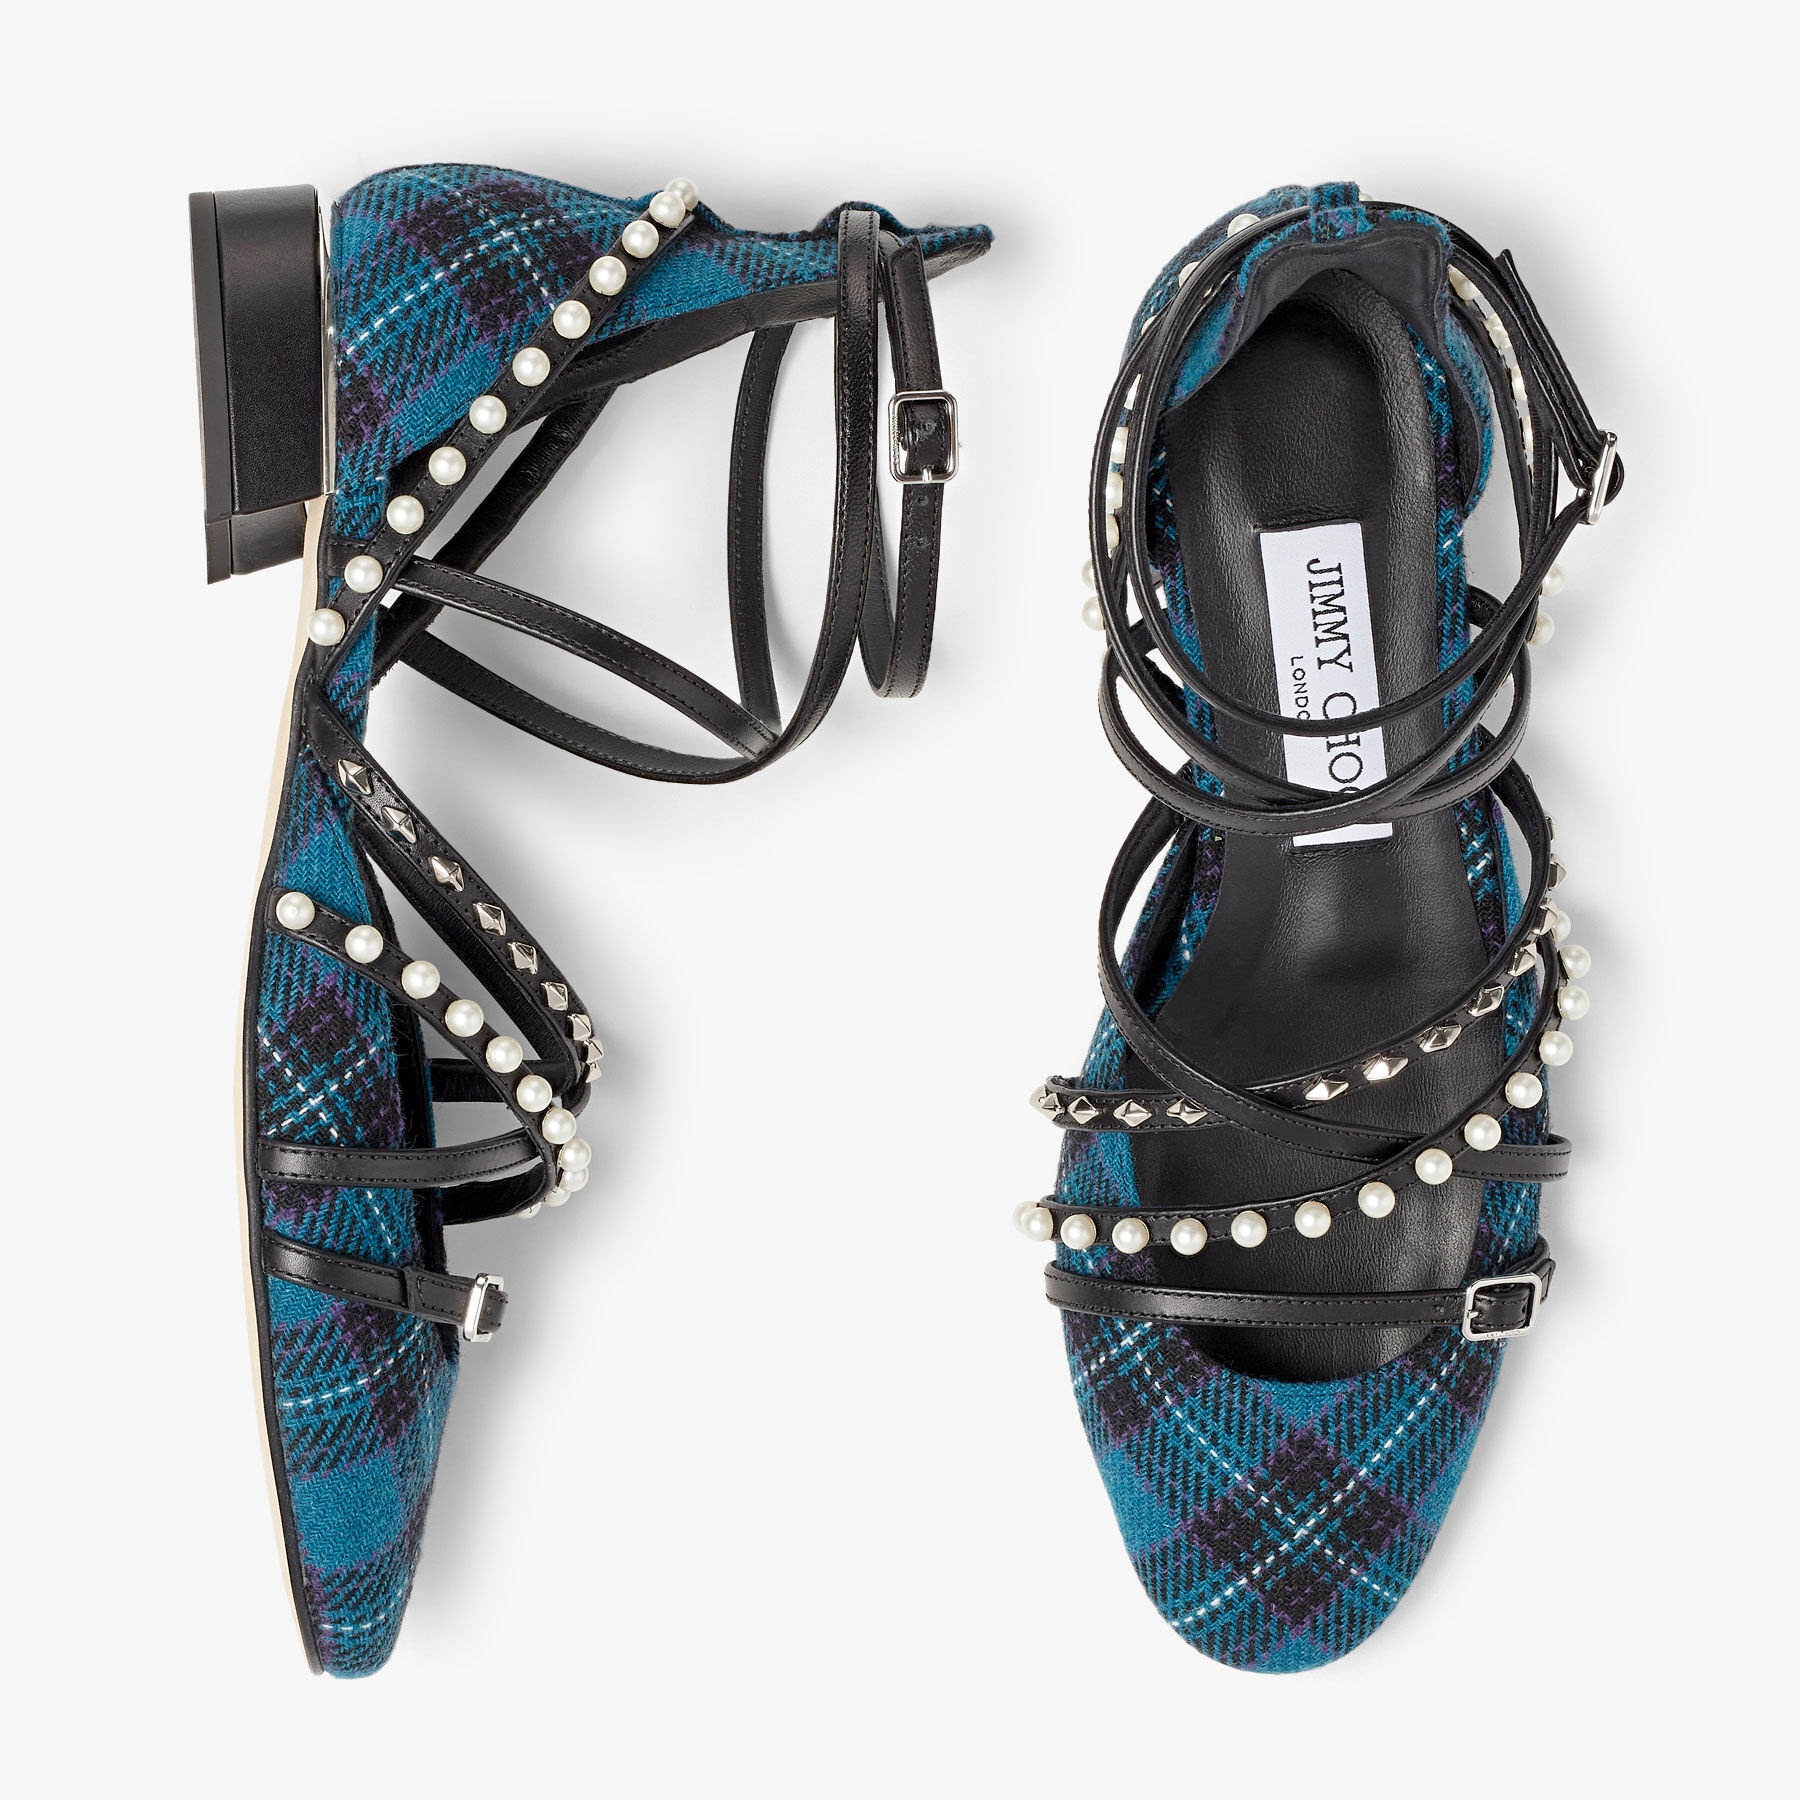 Celestia 25
Peacock Tartan Fabric Pumps with Pearls and Studs - 4